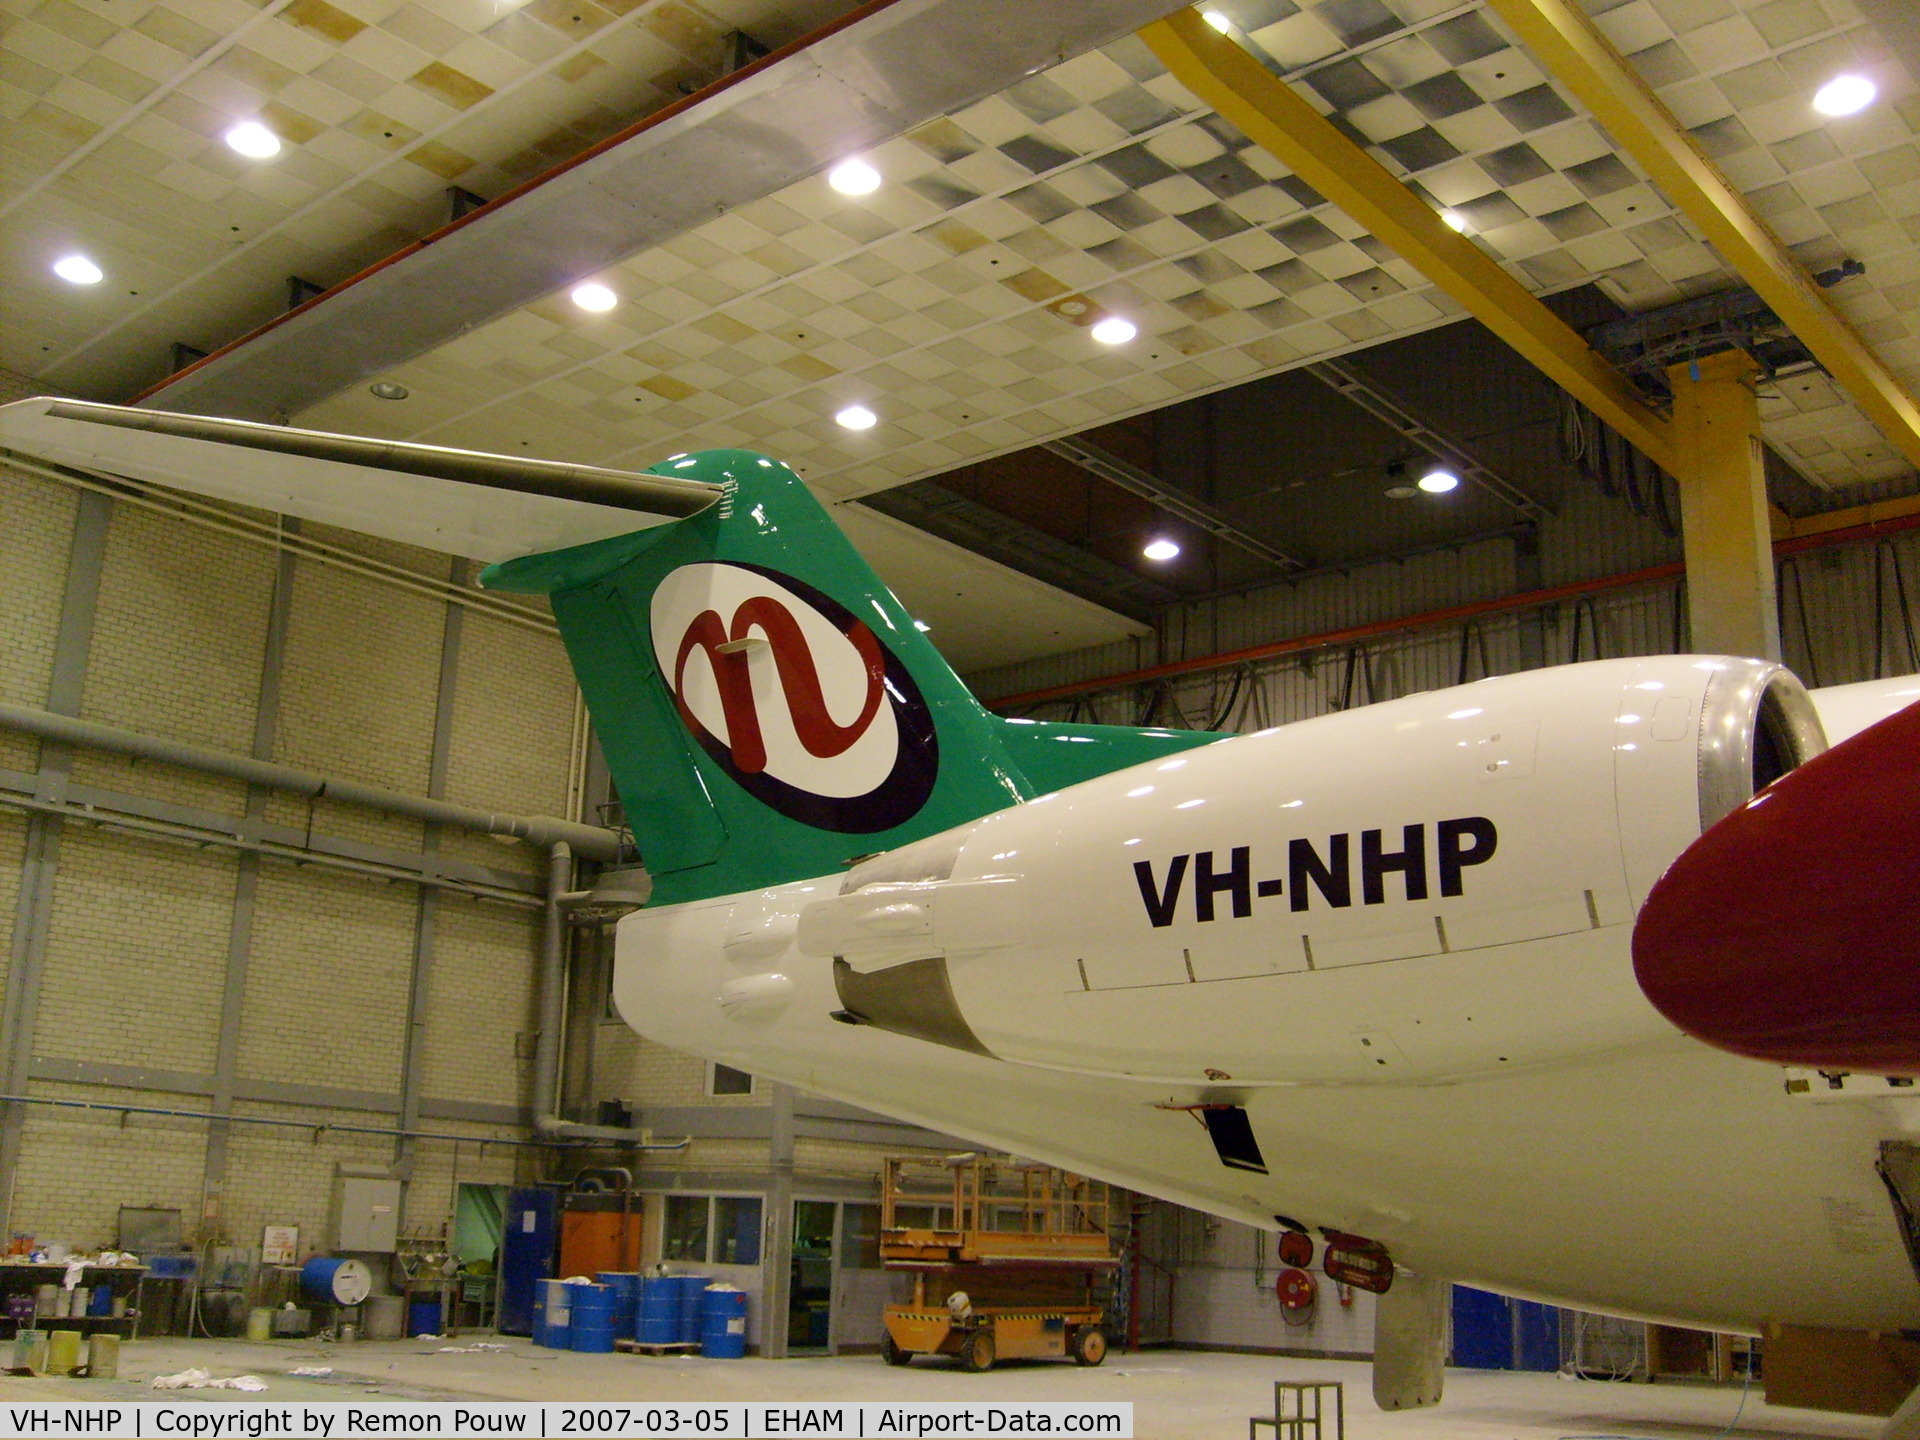 VH-NHP, 1992 Fokker 100 (F-28-0100) C/N 11399, First jet powered aircraft for Network Aviation. Seen here inside the QAPS painting hangar at Schiphol, approx. 8 hours before it rolled out. (Ex Air Berlin D-AGPS)